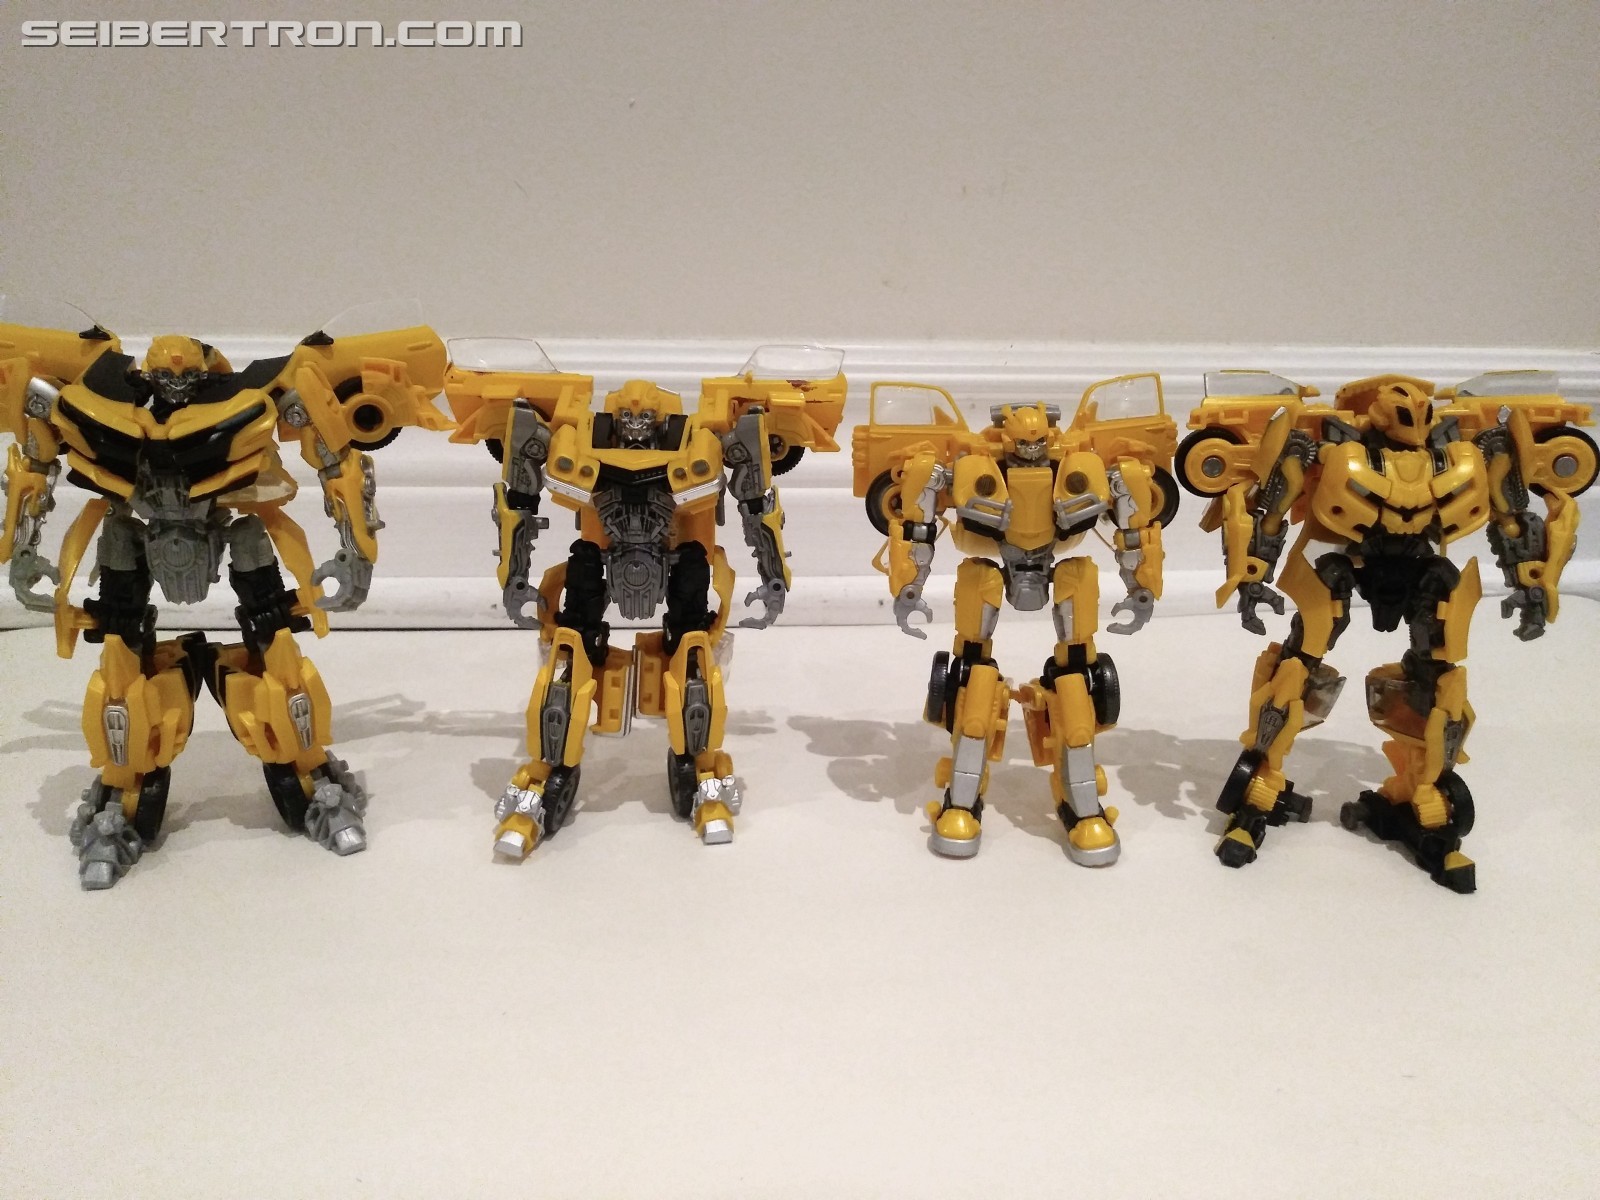 Toy Report: Transformers Prime Bumblebee